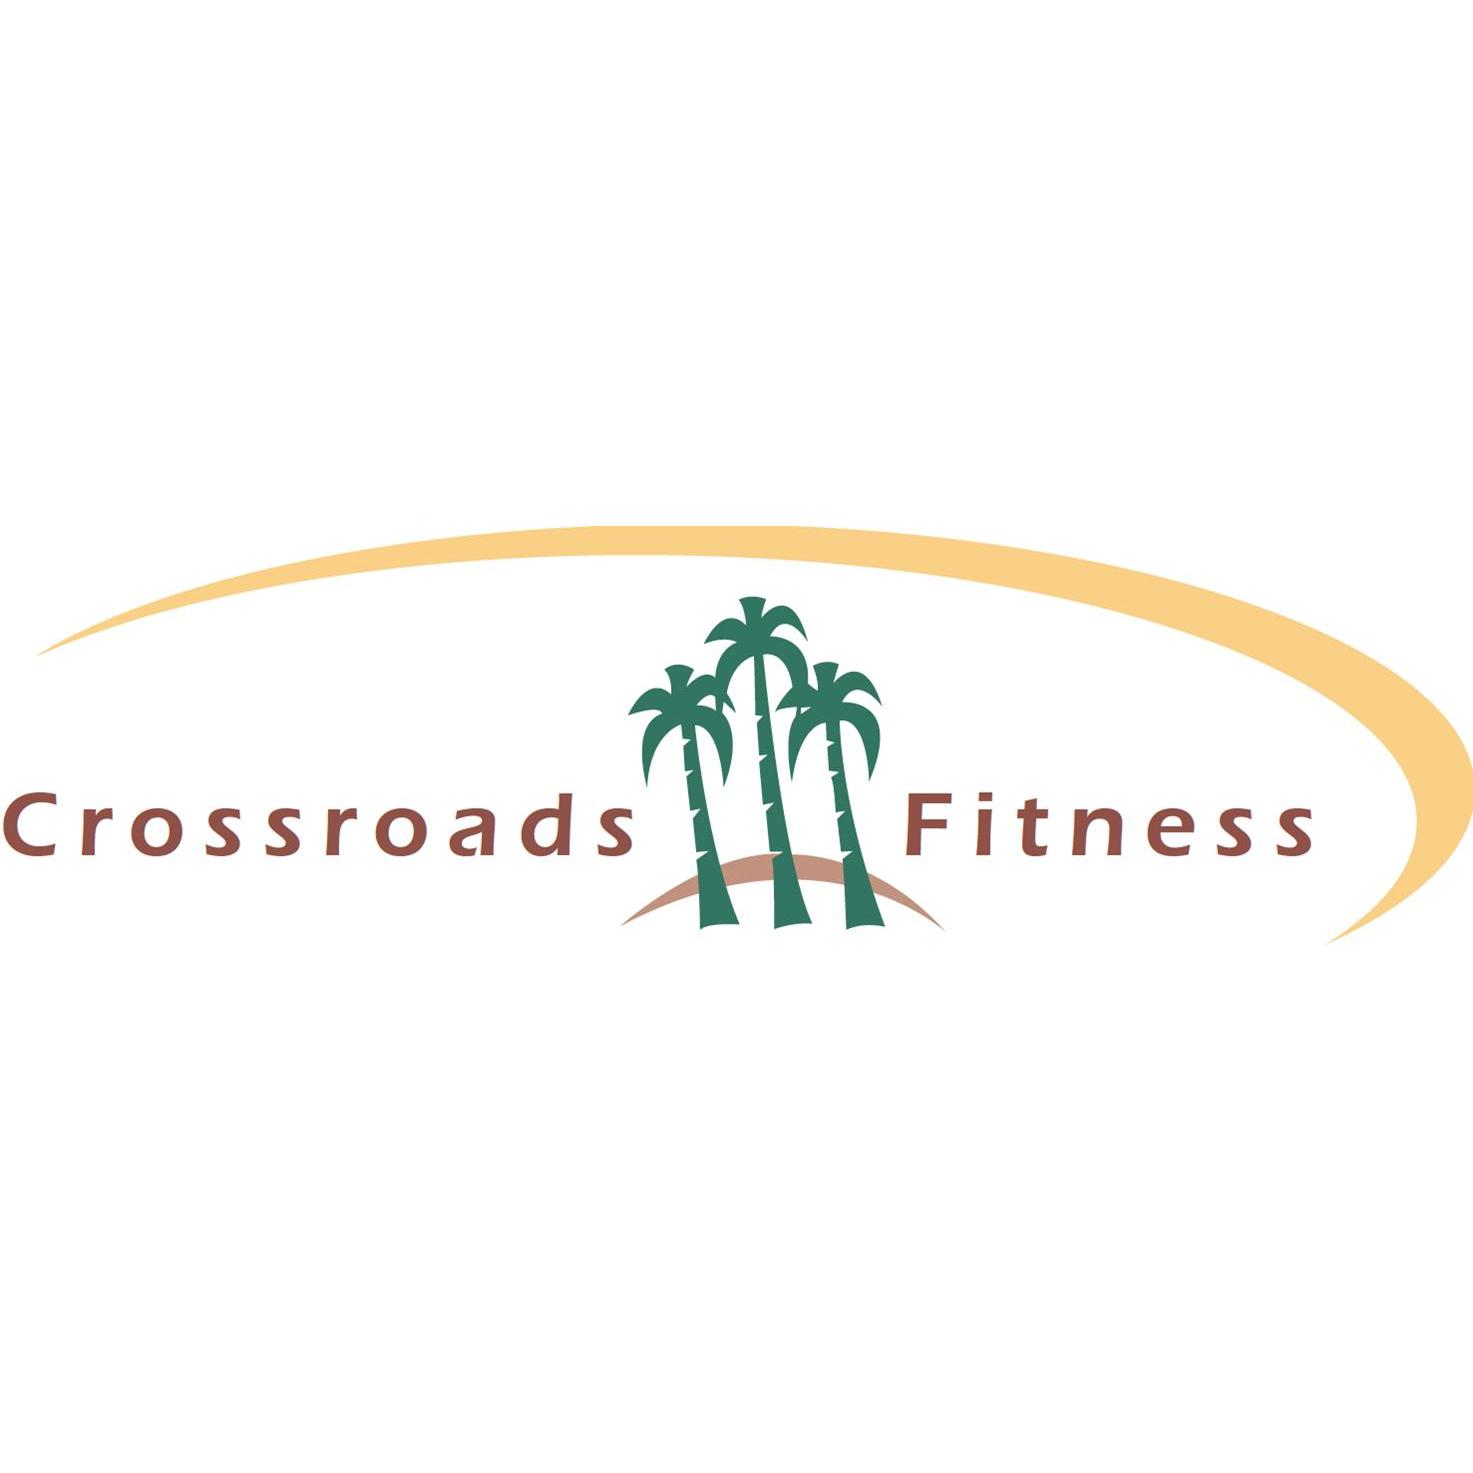 Crossroads Fitness North - Grand Junction, CO 81506 - (970)242-8746 | ShowMeLocal.com